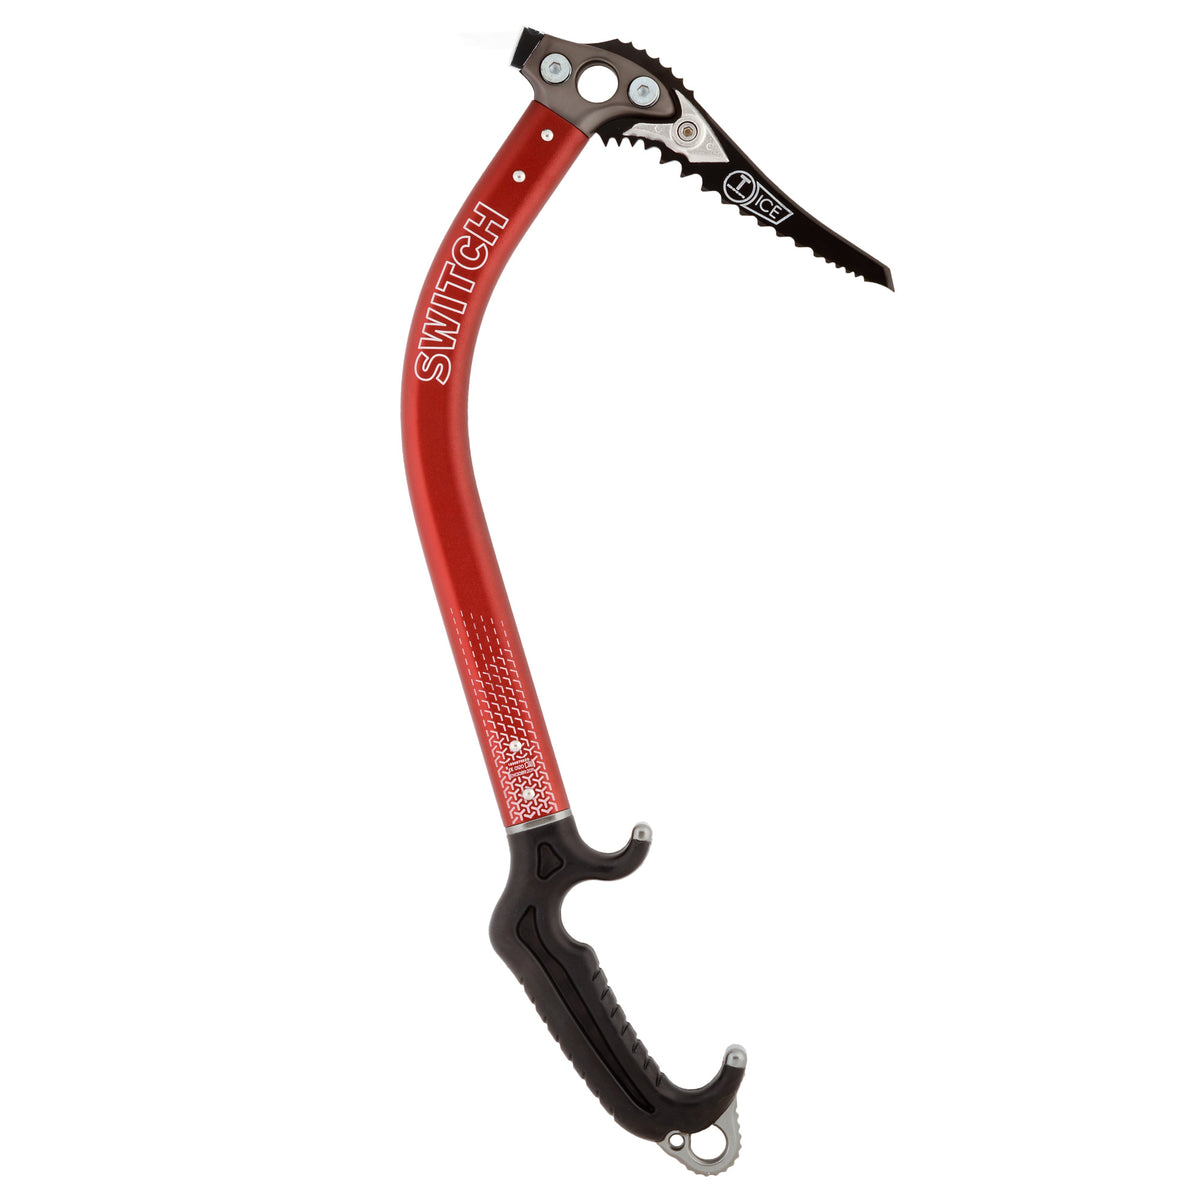 DMM Switch Ice Axe